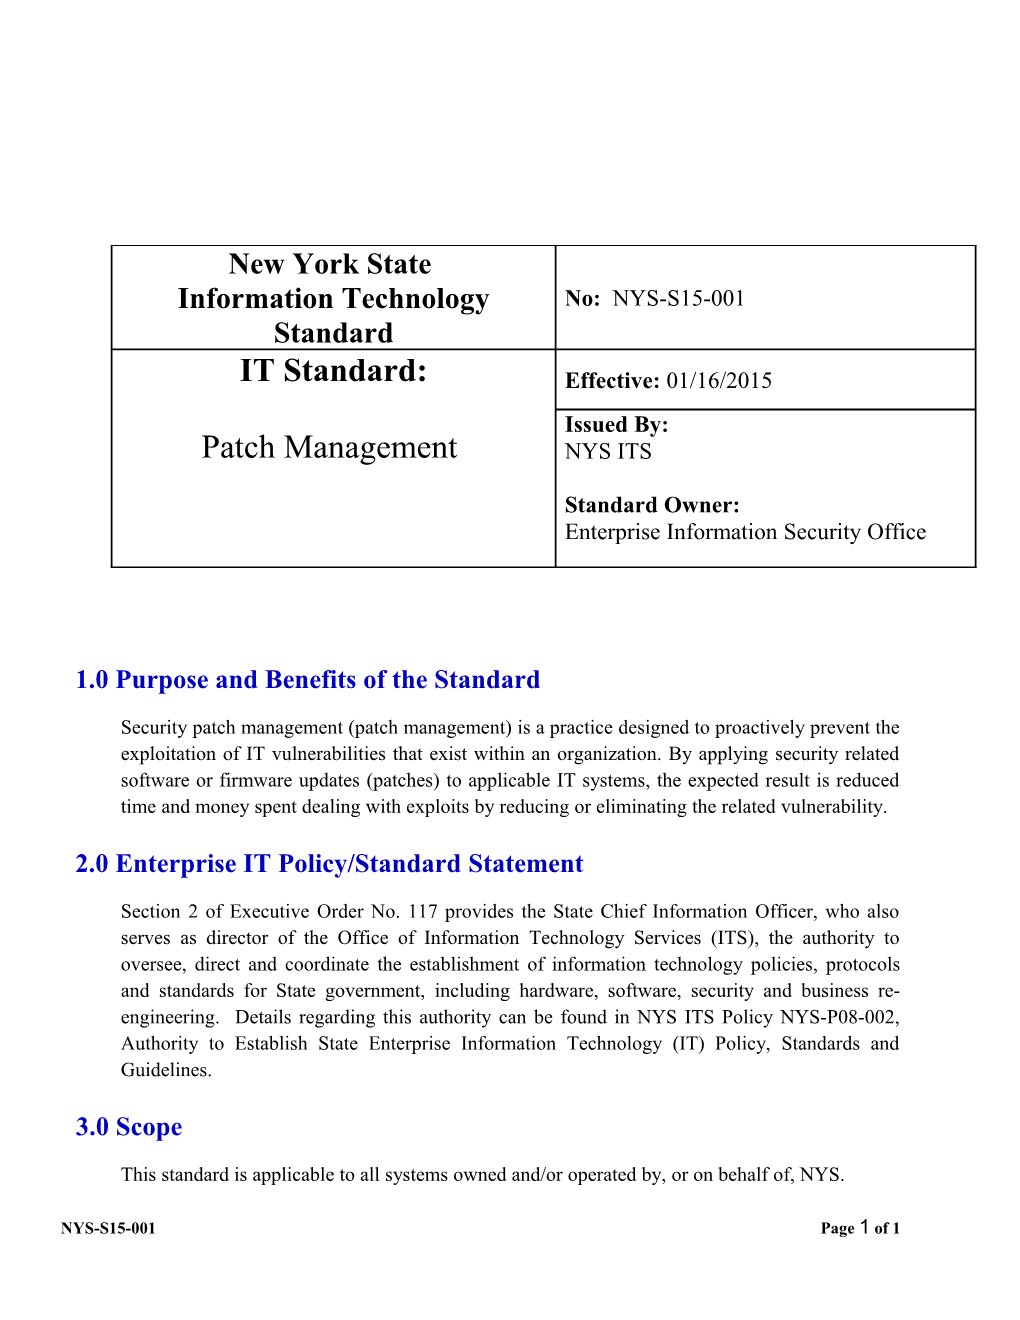 This Standard Is Applicable to All Systems Owned And/Or Operated By, Or on Behalf Of, NYS